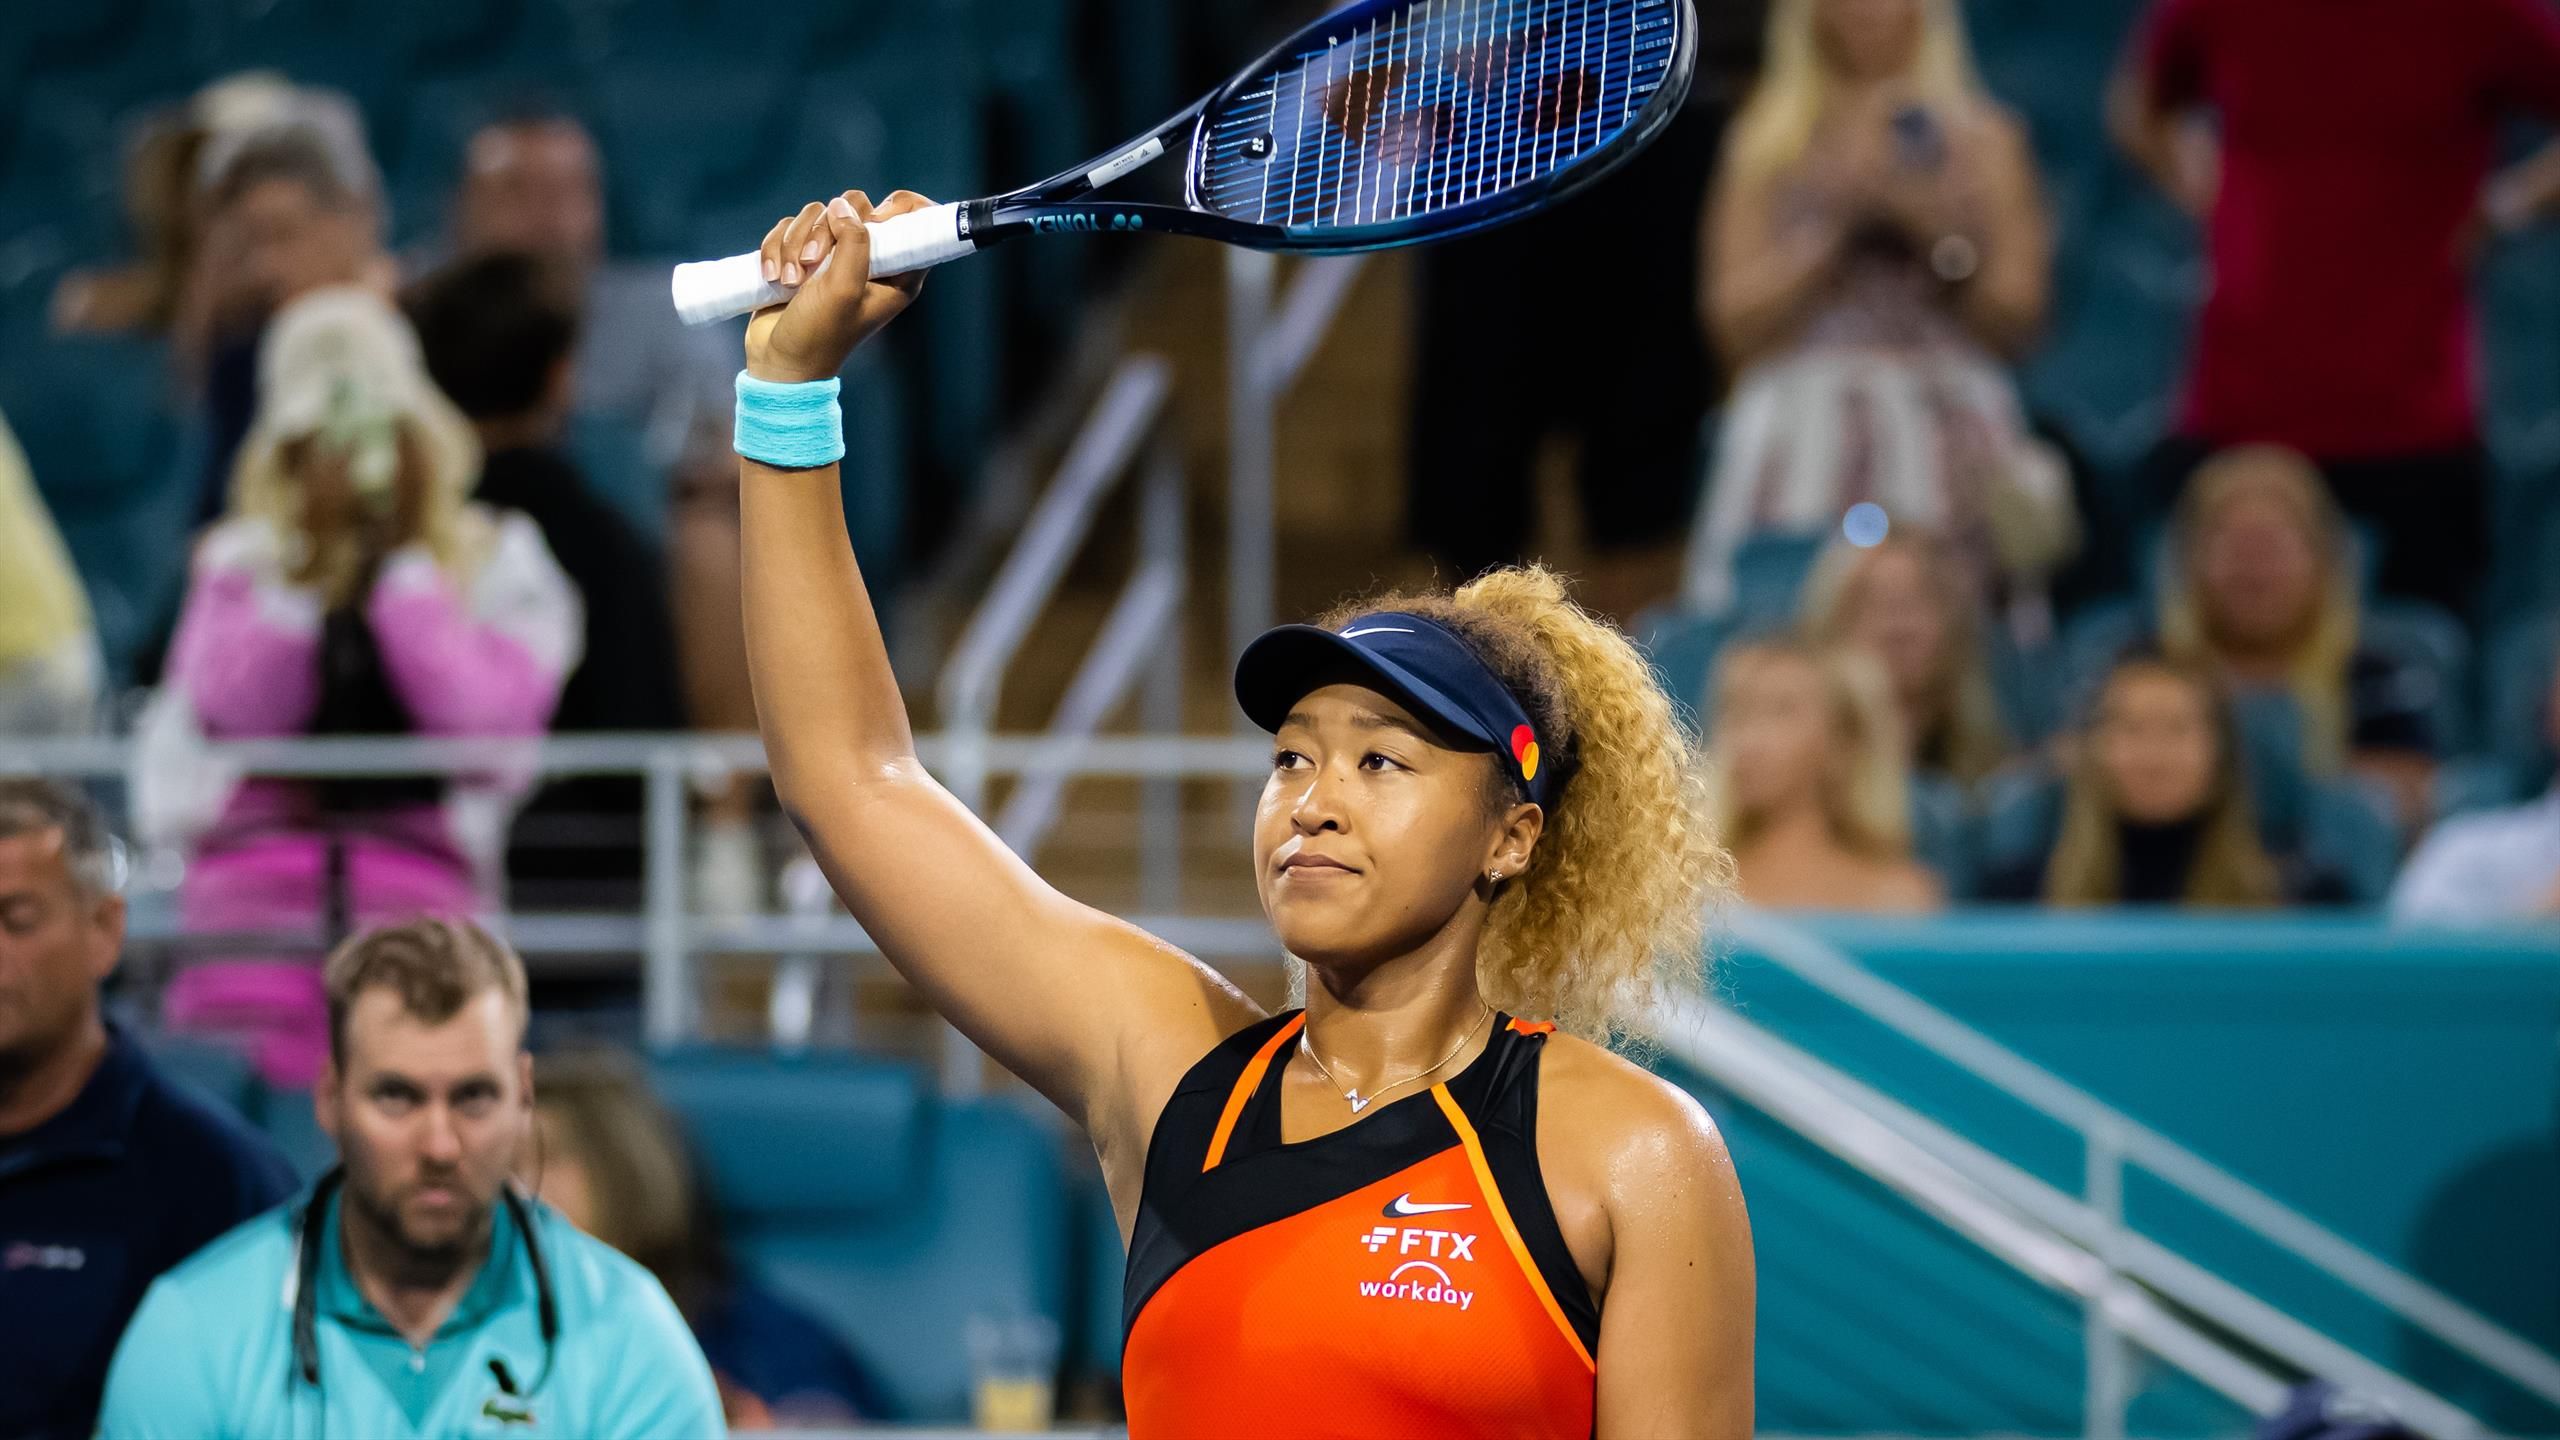 I hope she is okay - Naomi Osaka downs Danielle Collins in an hour at Miami Open, is concerned for opponent